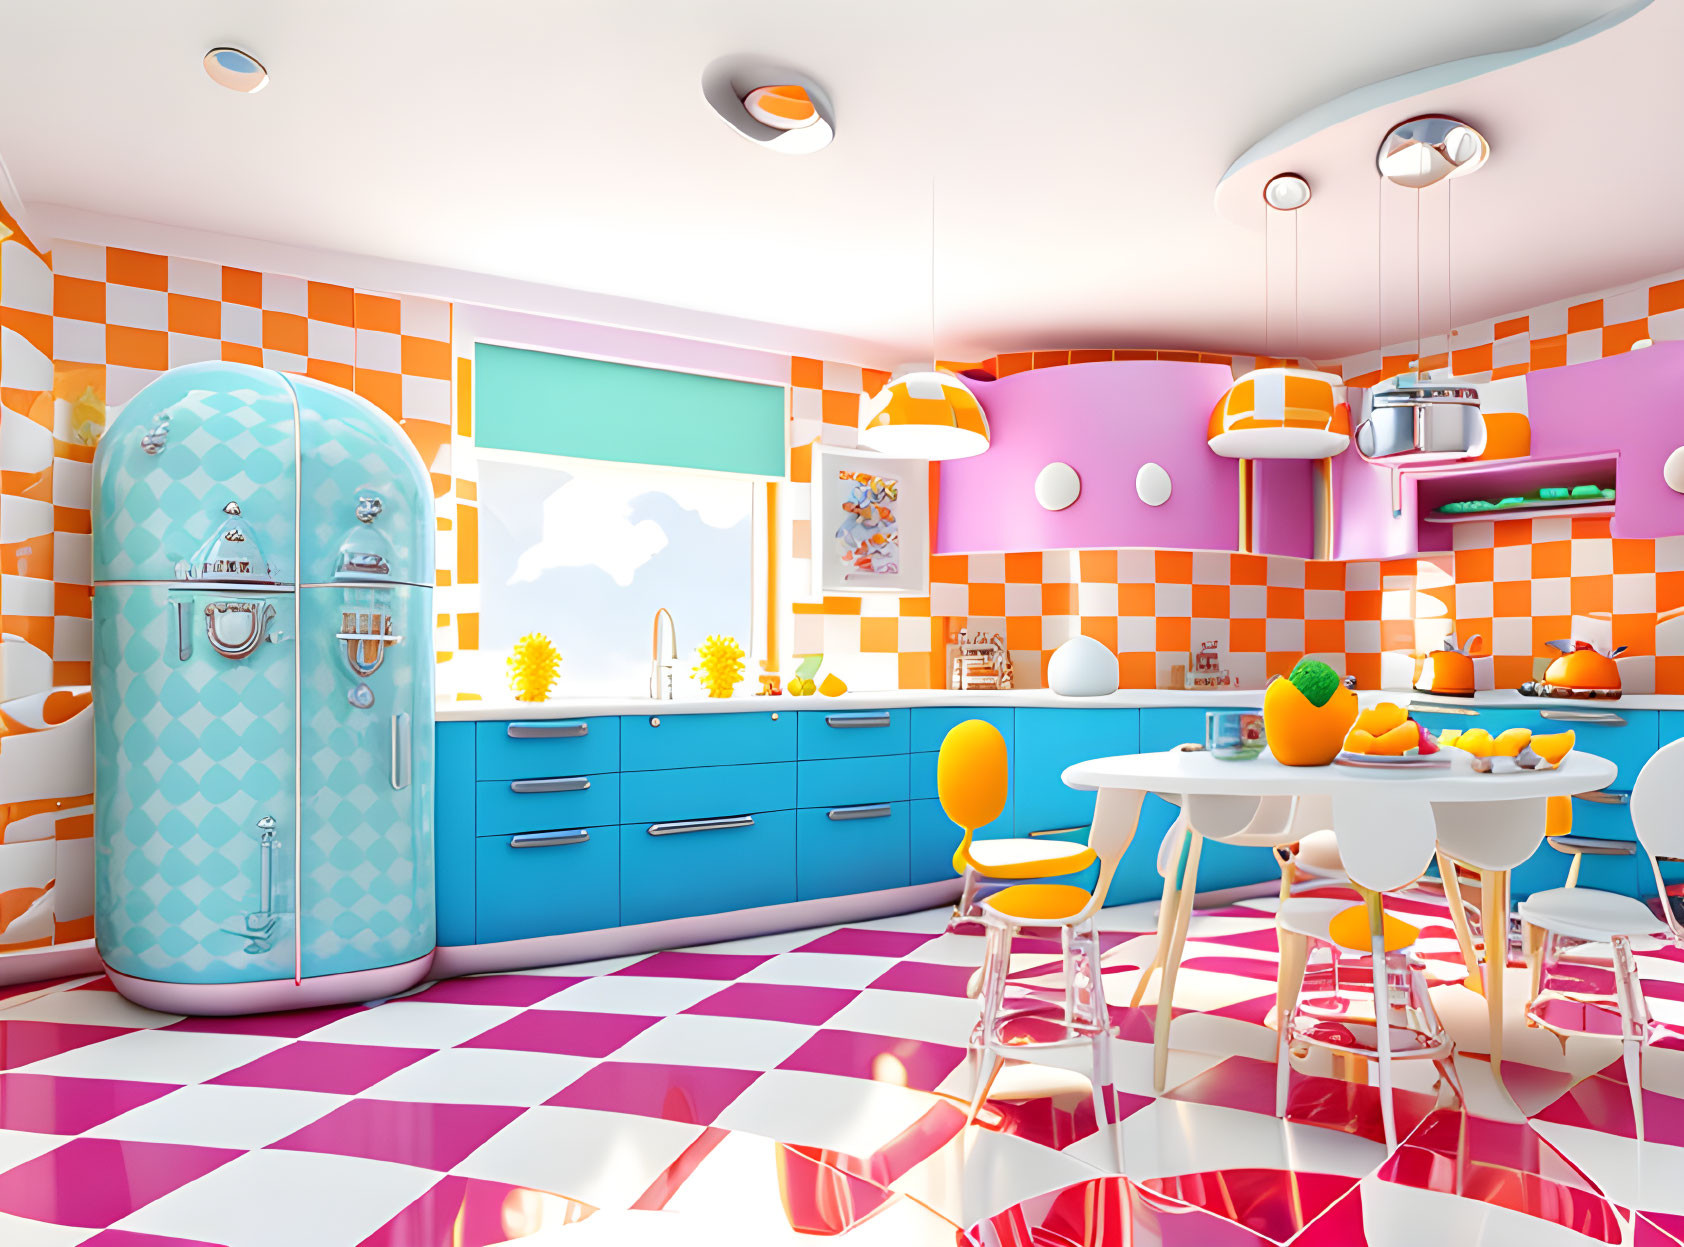 Vibrant retro kitchen with checkerboard floor and turquoise cabinets